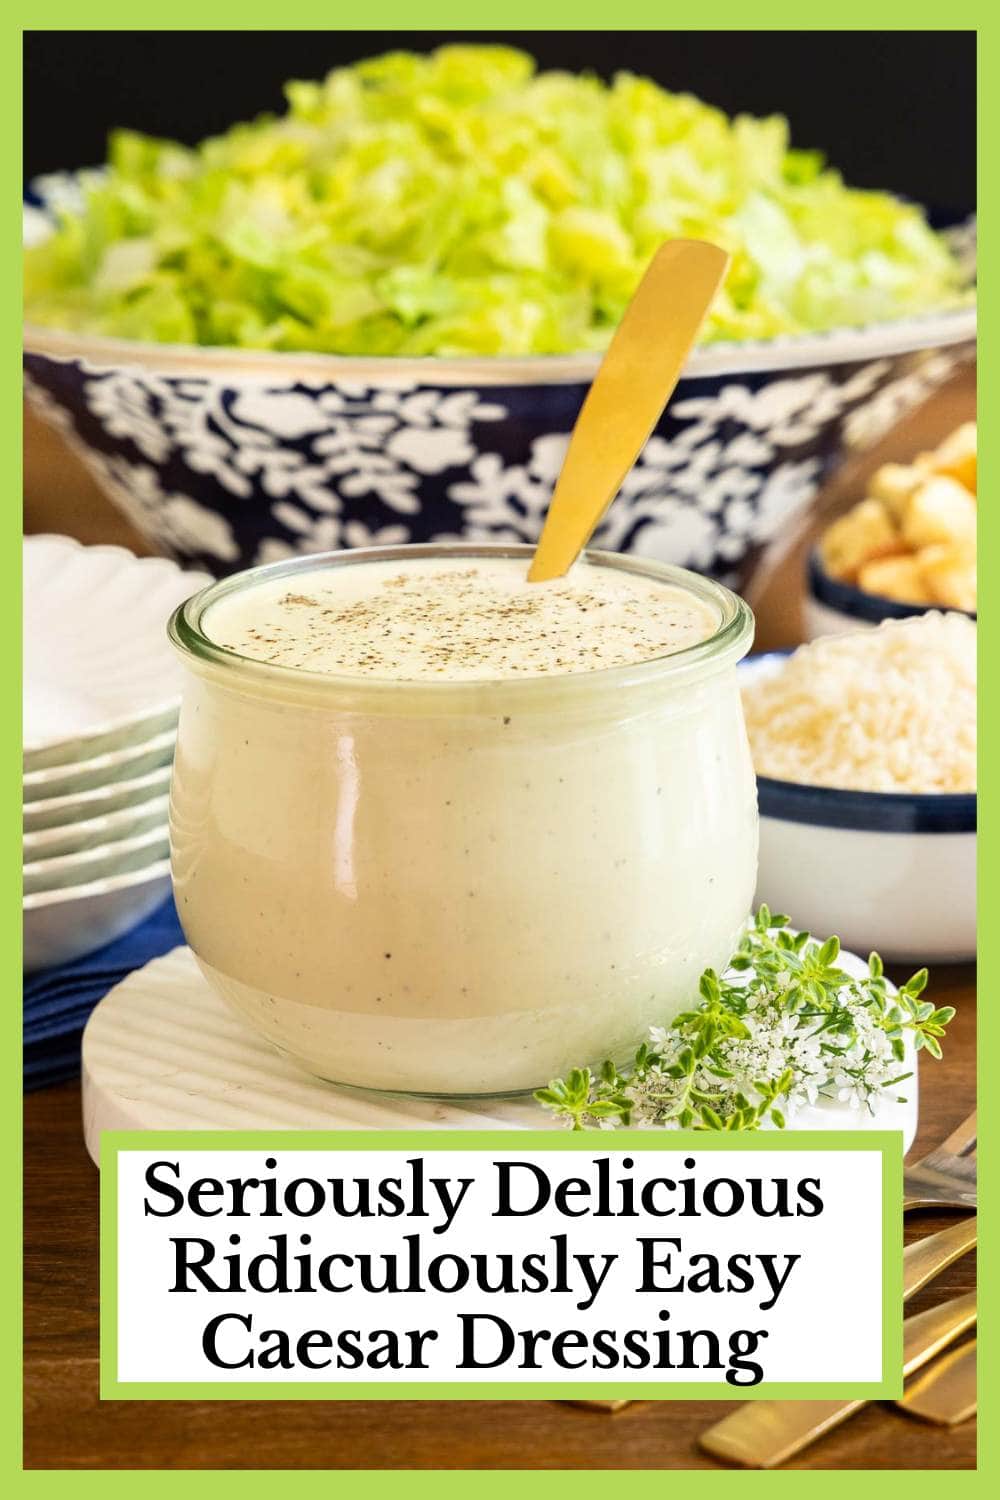 Seriously Delicious, Ridiculously Easy Caesar Dressing